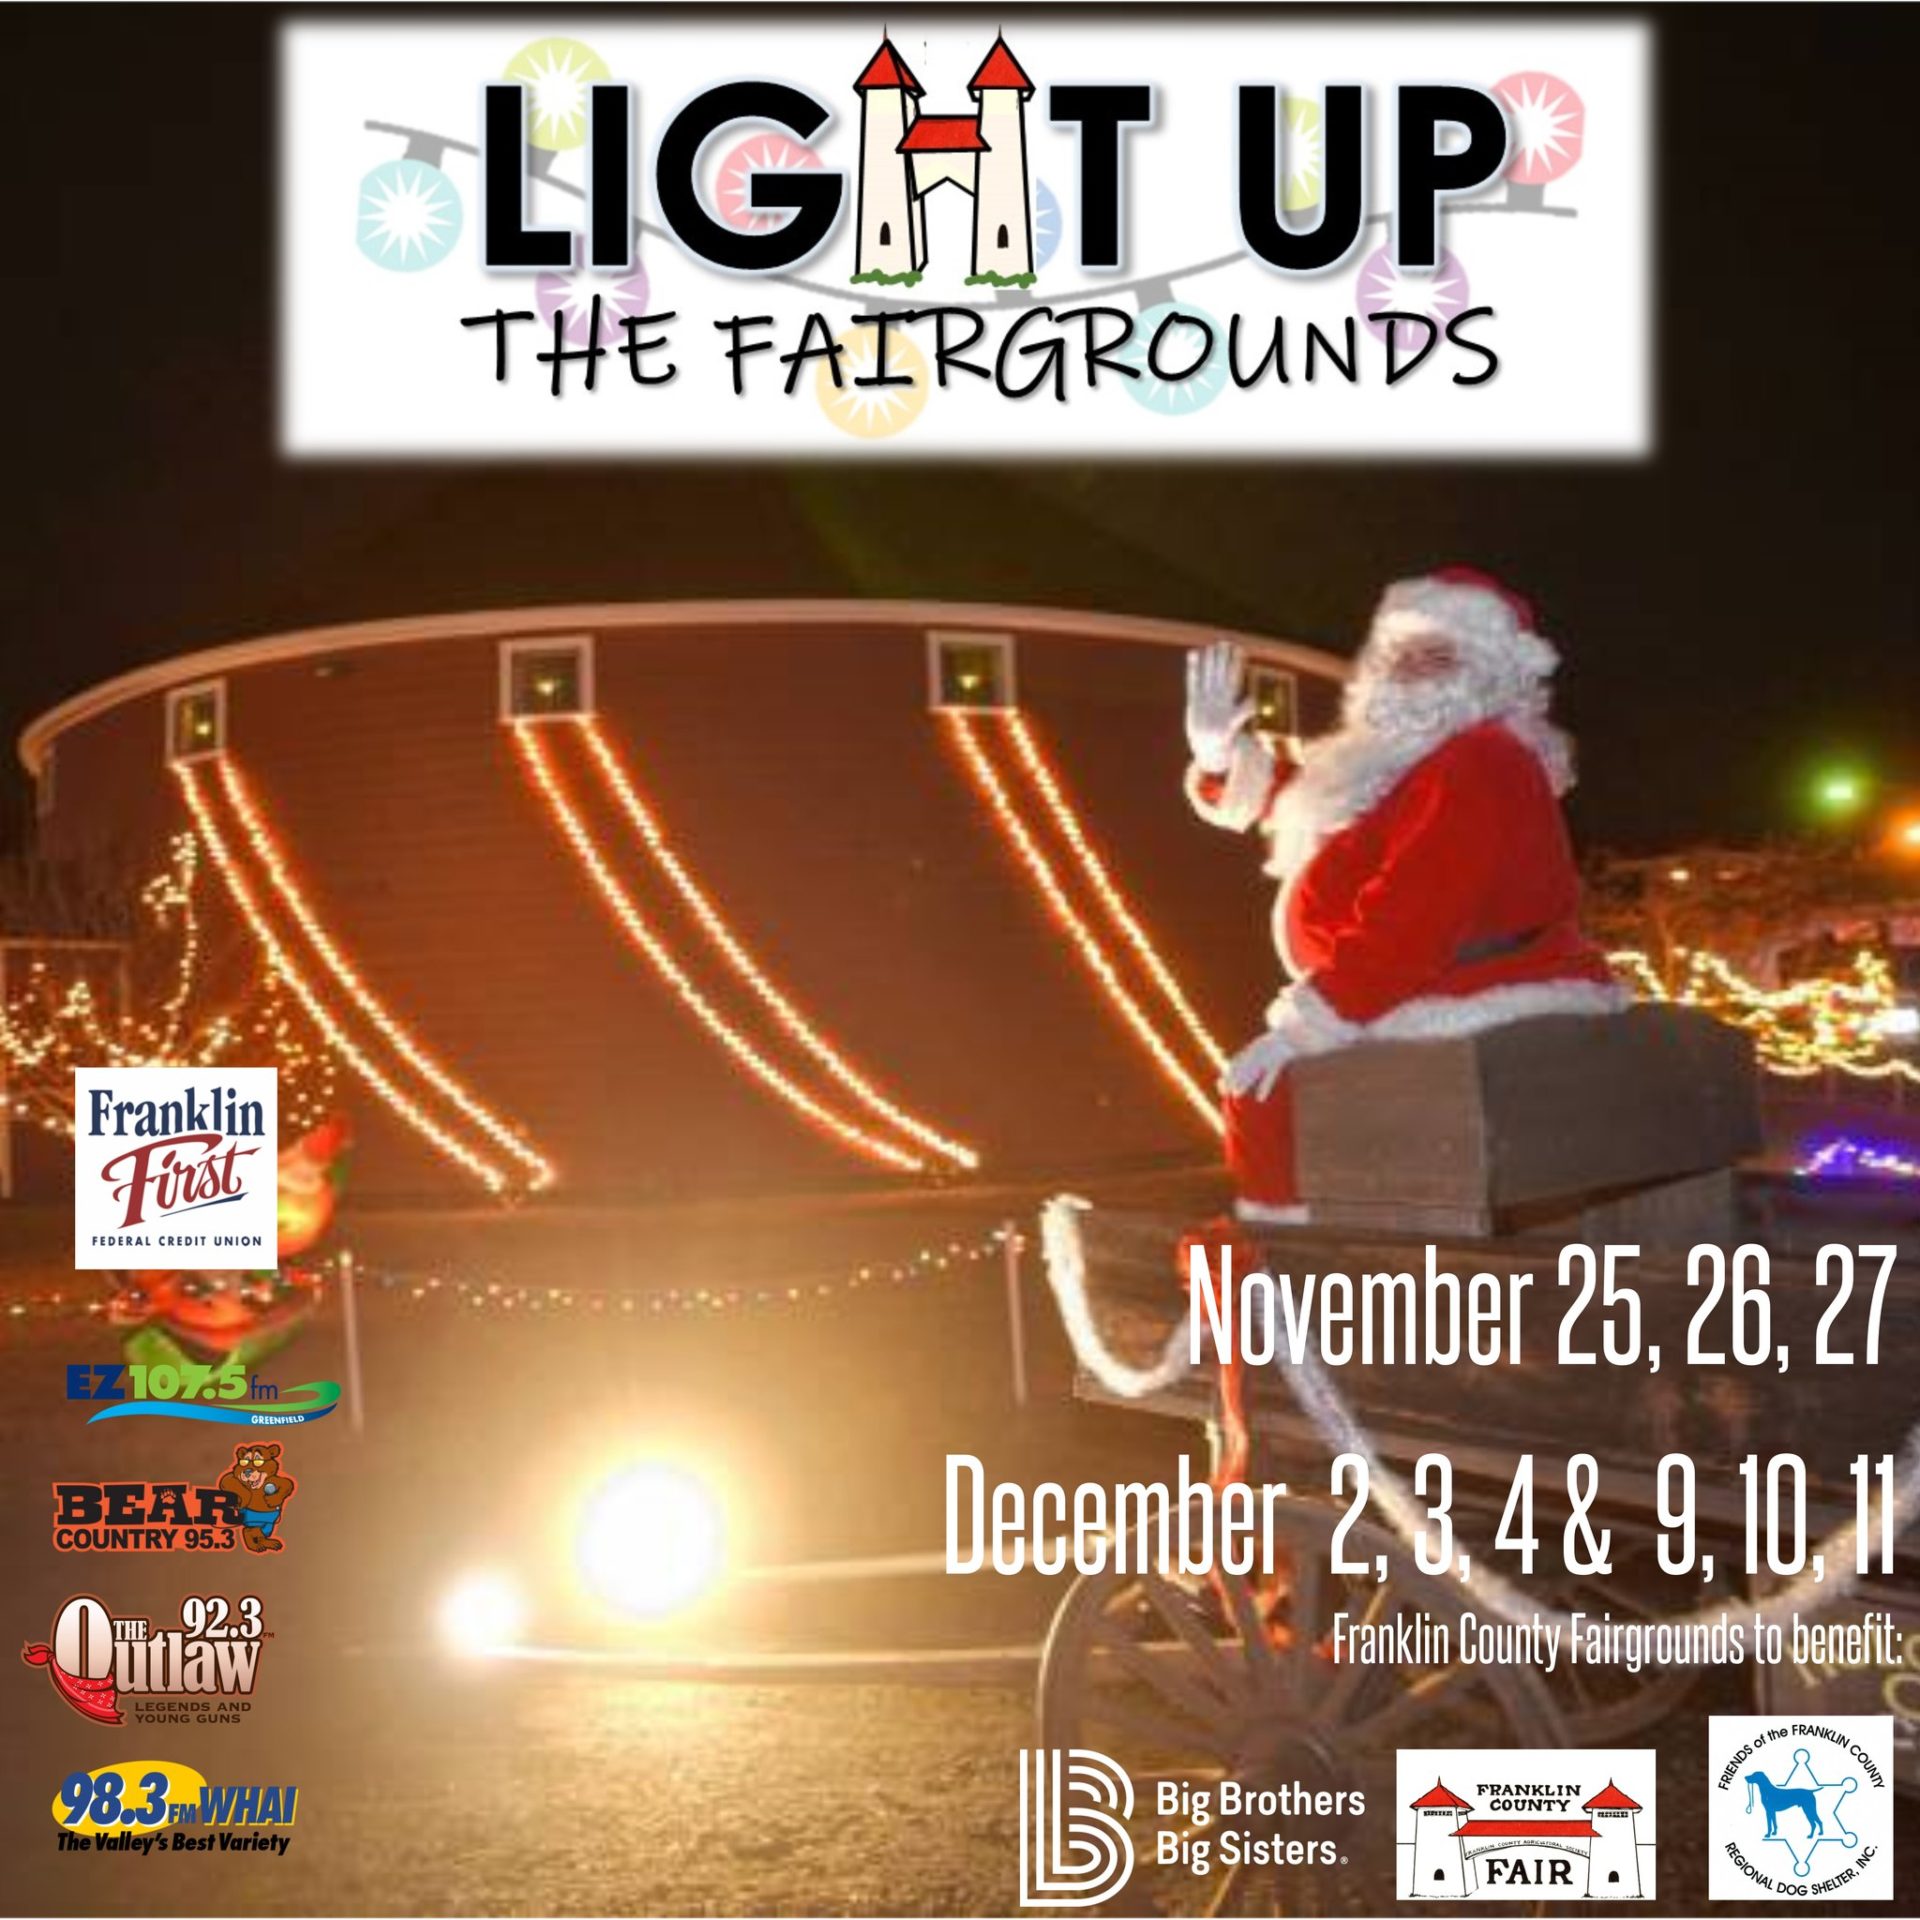 Light up the fairgrounds logo with a picture of santa on his sleigh